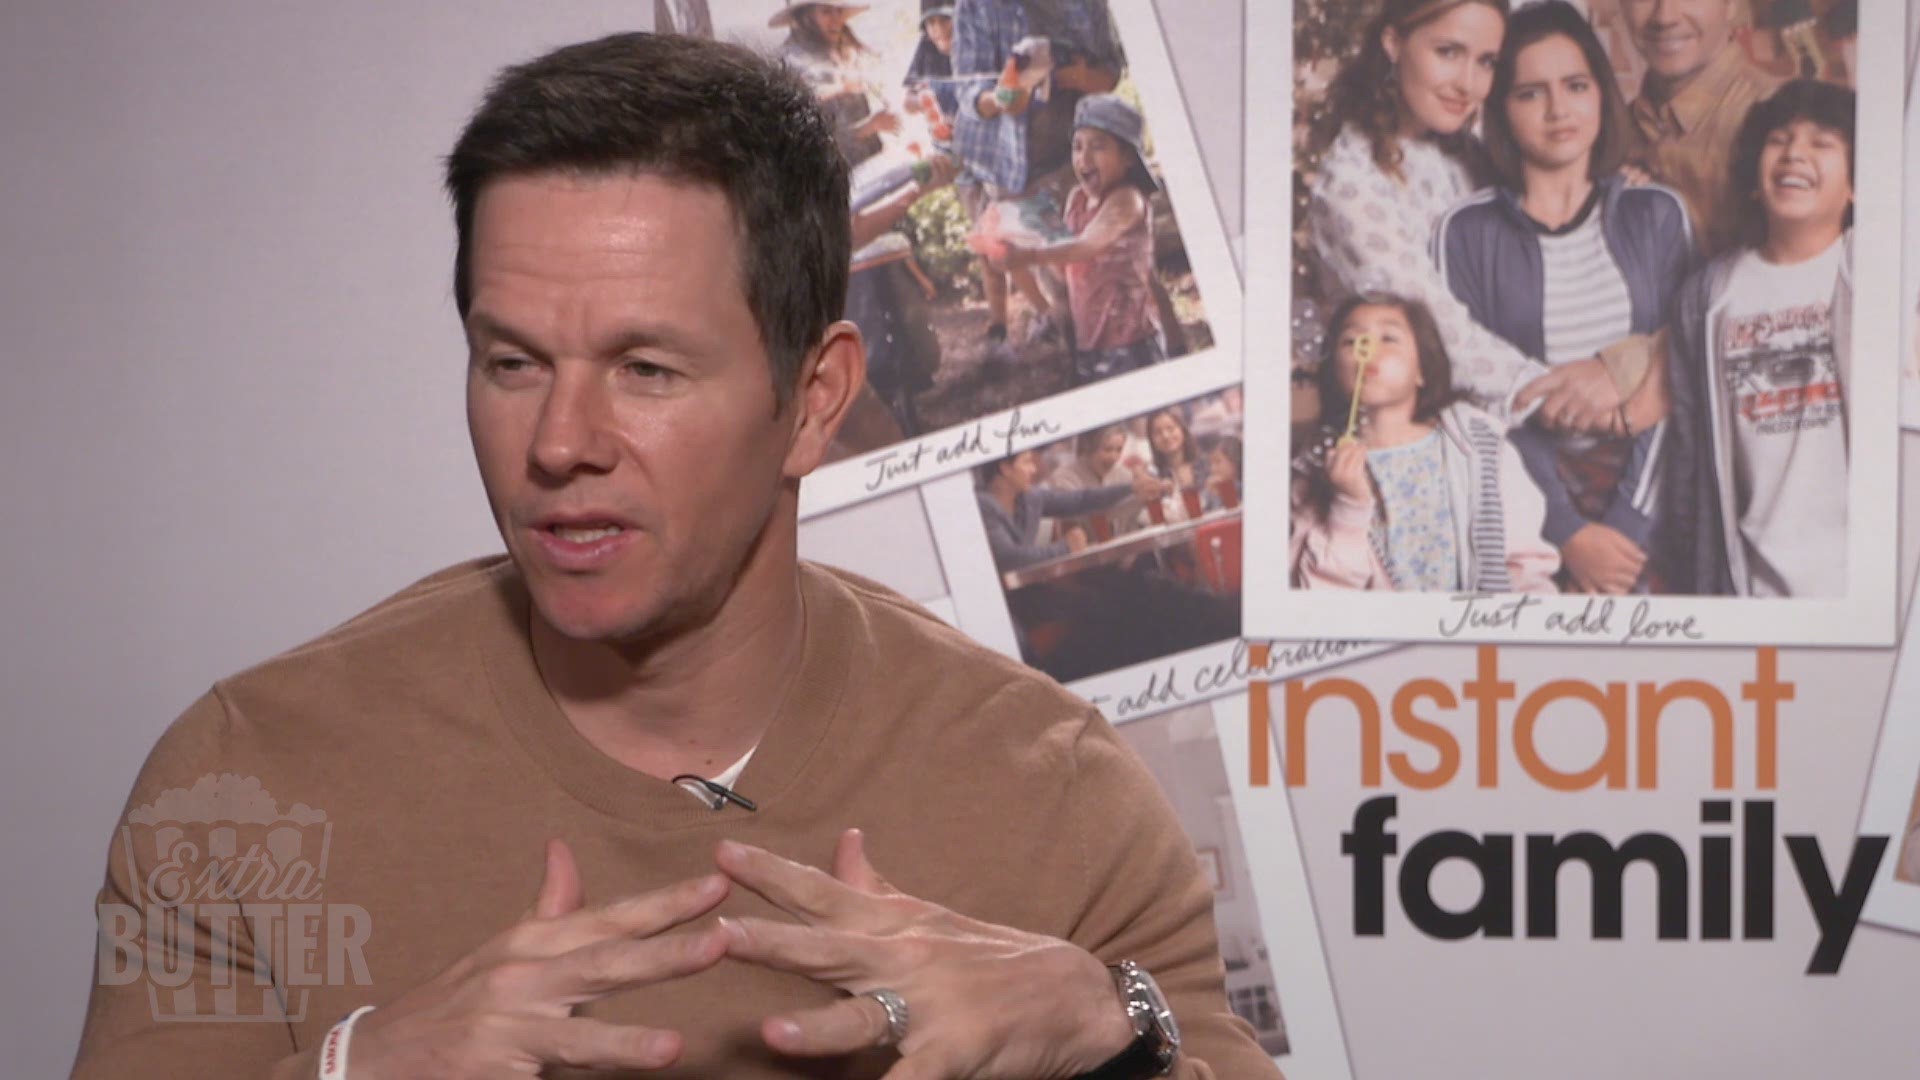 Mark Wahlberg and Rose Byrne talk parenting advice in this interview with Mark S. Allen. Wahlberg explains why his nieces and nephews better be nice to his kids. The actors also talk about the importance of adoption and family. Interview provided by Paramount Pictures.